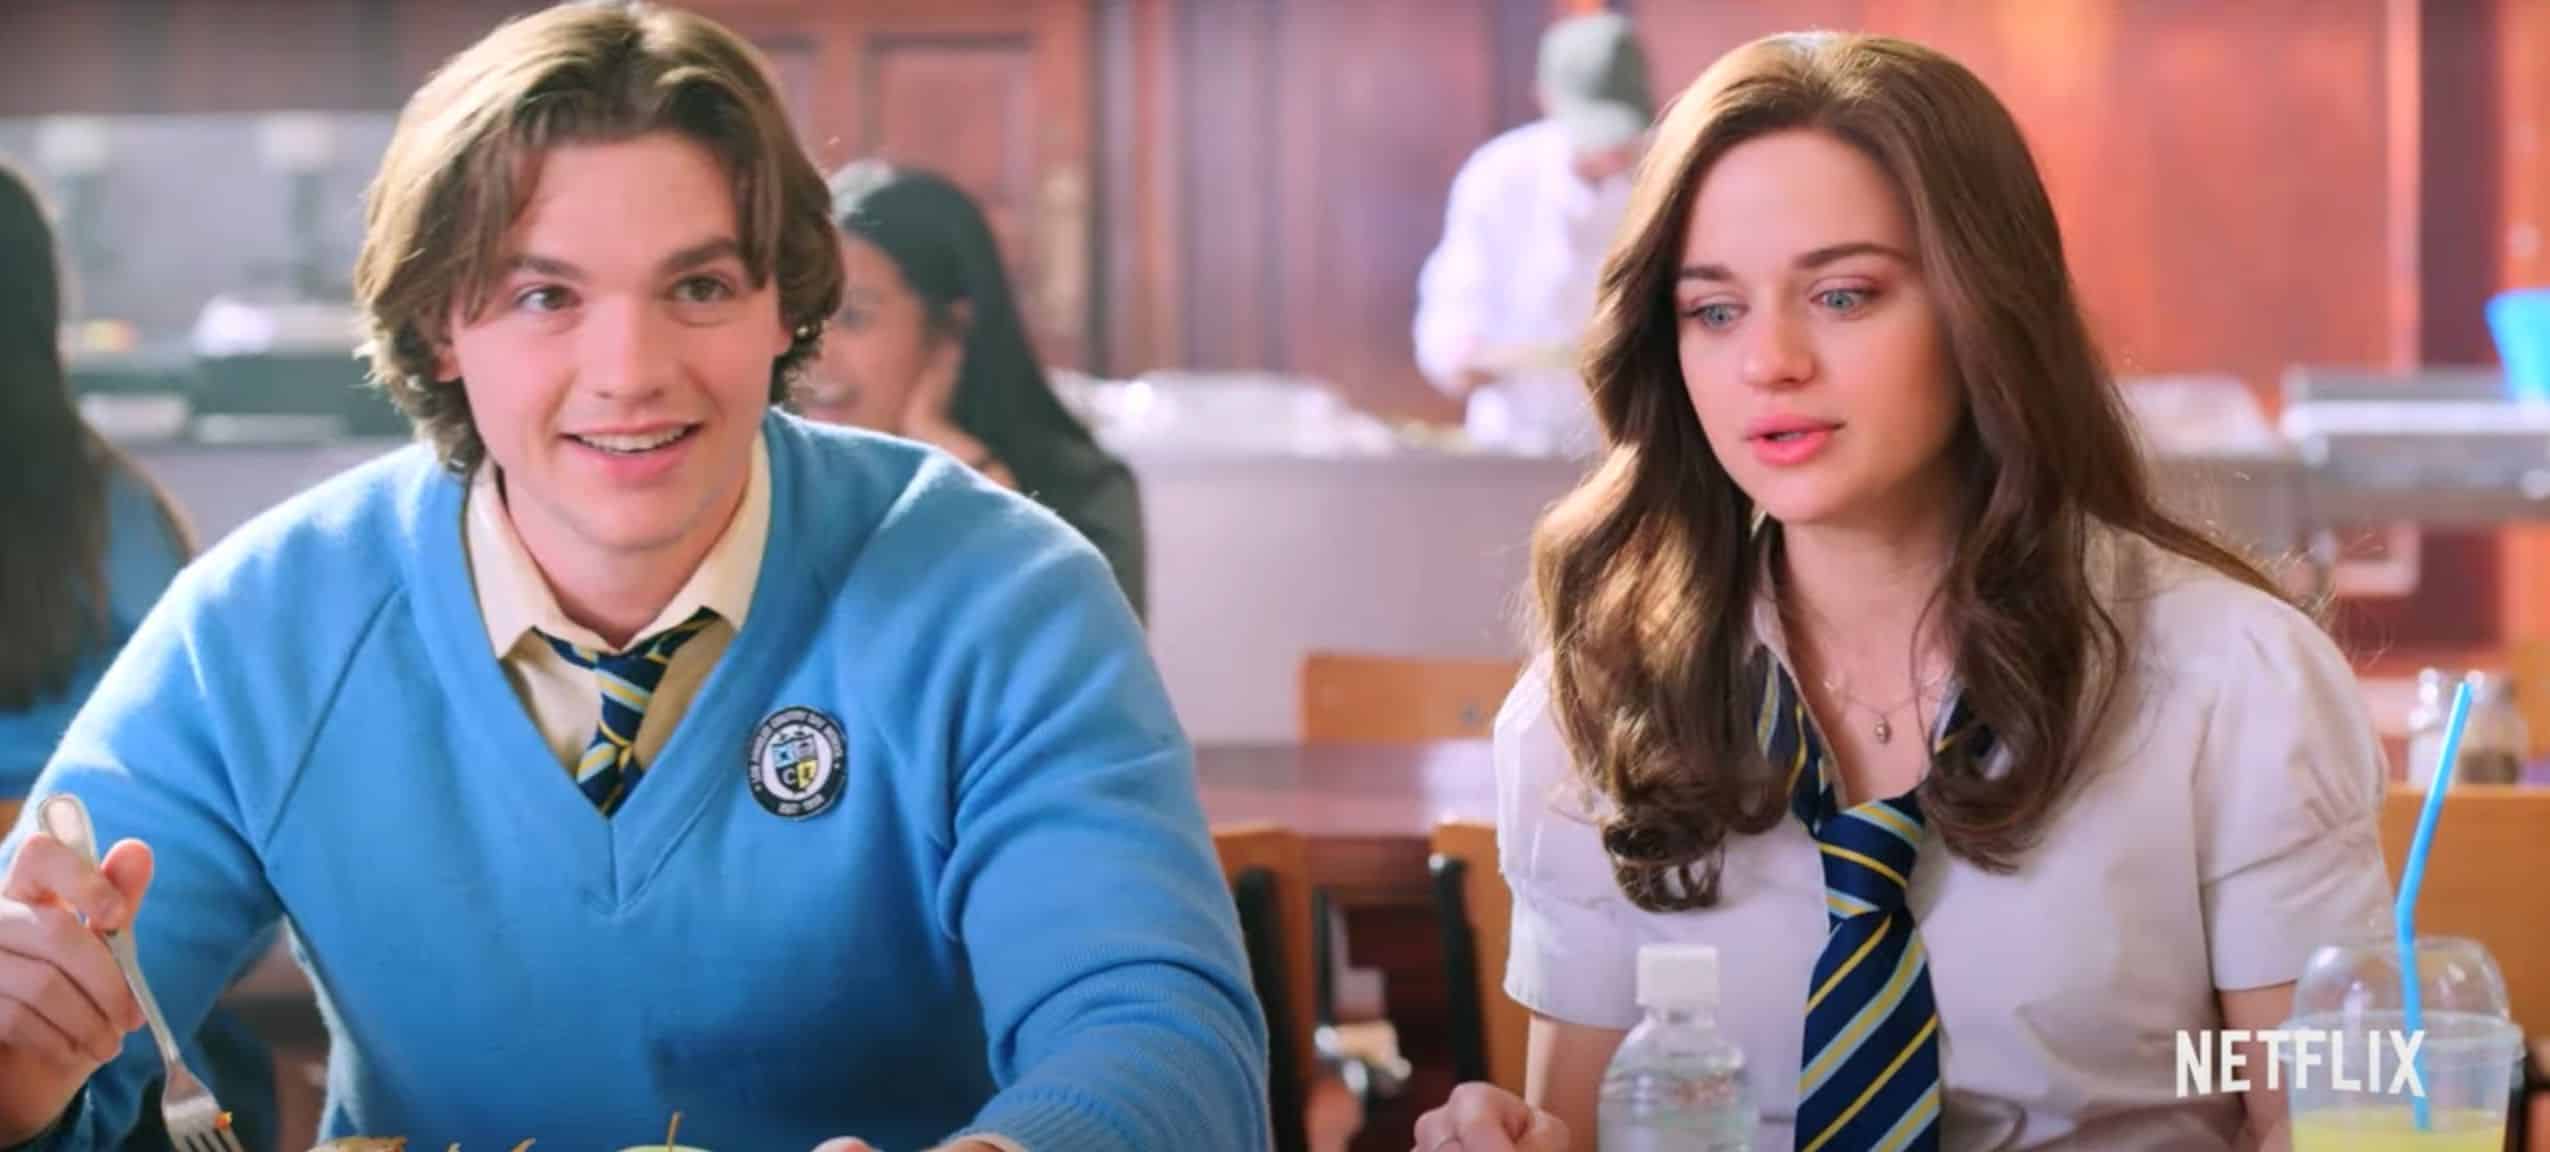 20 Cutest Dialogues From The Kissing Booth